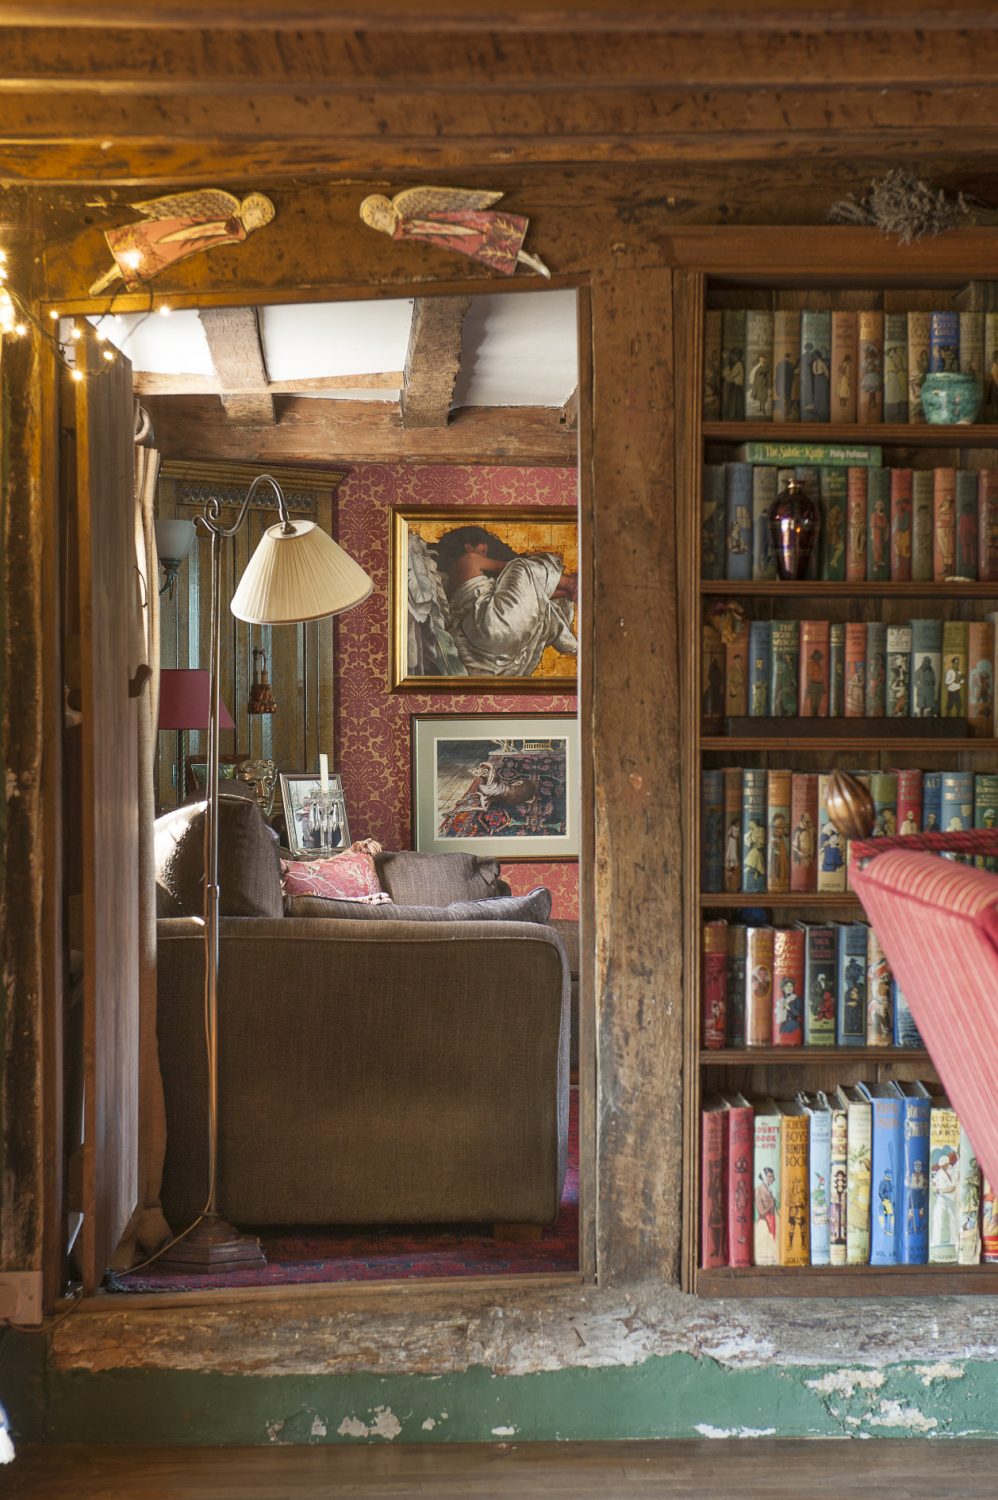 Instead of wallpaper depicting the spines of books, Tim and Eve have a wall of children’s books dating from the First World War to the mid 1950s